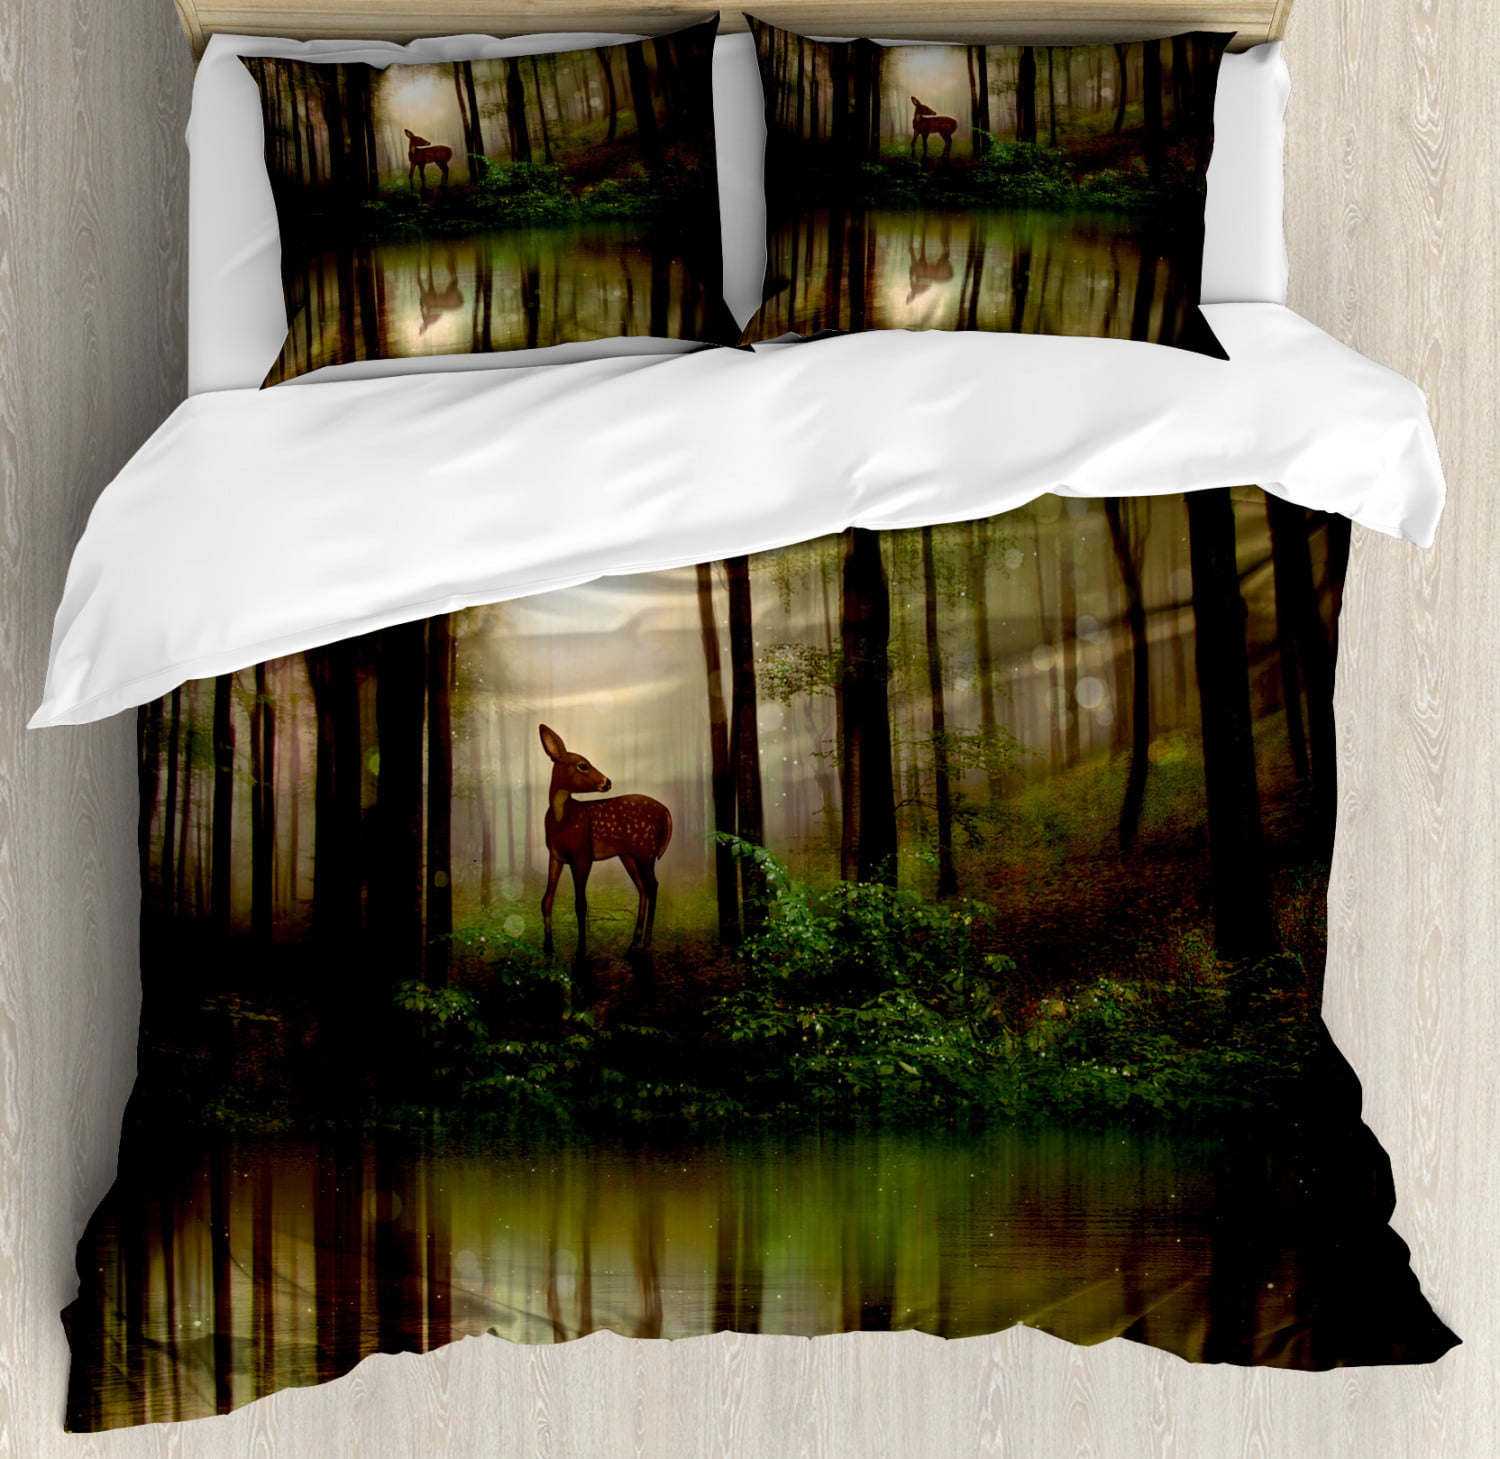 Nature Queen Size Duvet Cover Set, Baby Deer in the Forest with ...